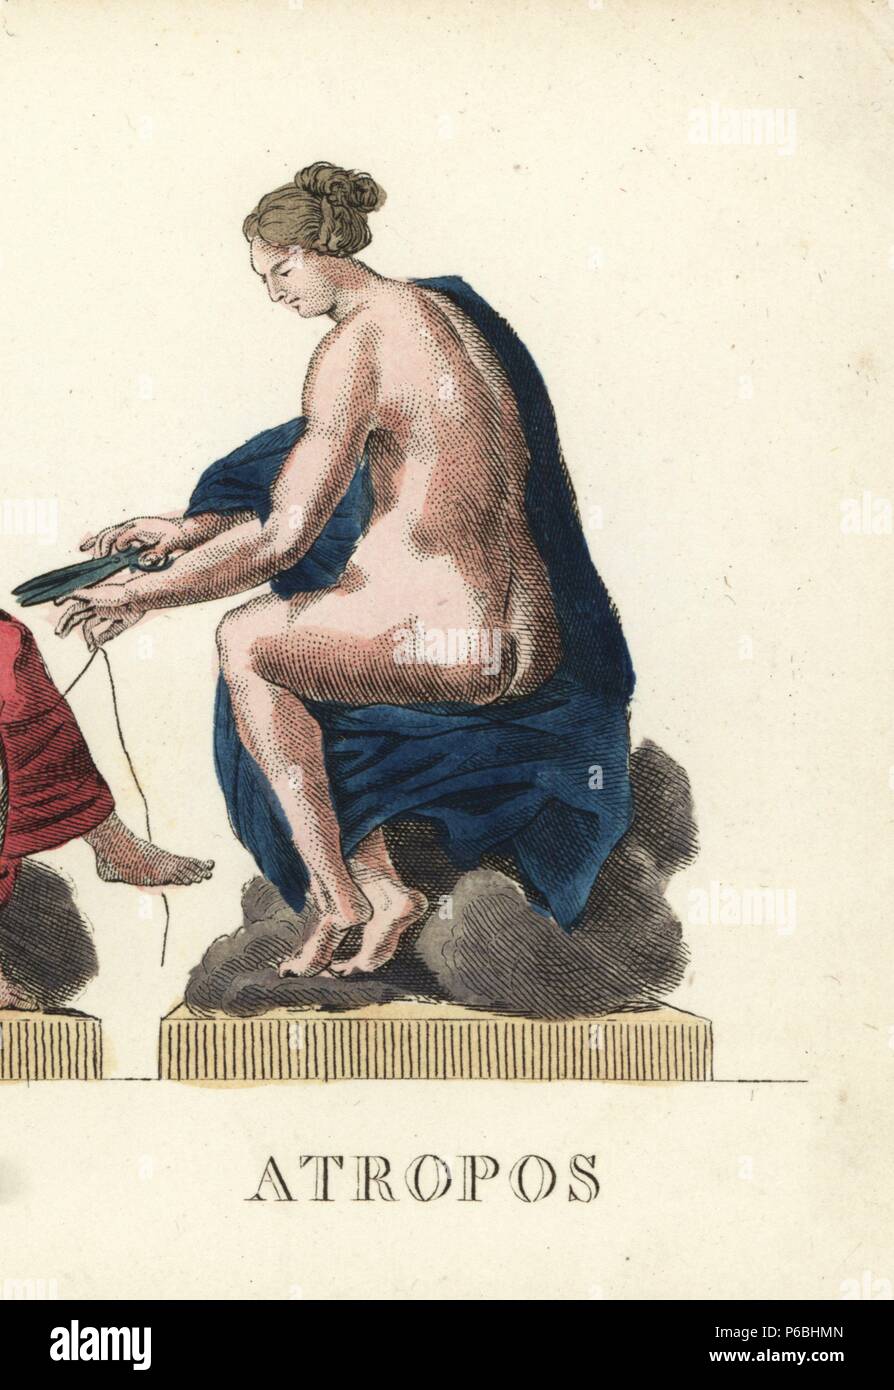 Atropos, one of the Greek Fates or Moirai, shown holding scissors to the thread of life. Handcoloured copperplate engraving engraved by Jacques Louis Constant Lacerf after illustrations by Leonard Defraine from 'La Mythologie en Estampes' (Mythology in Prints, or Figures of Fabled Gods), Chez P. Blanchard, Paris, c.1820. Stock Photo